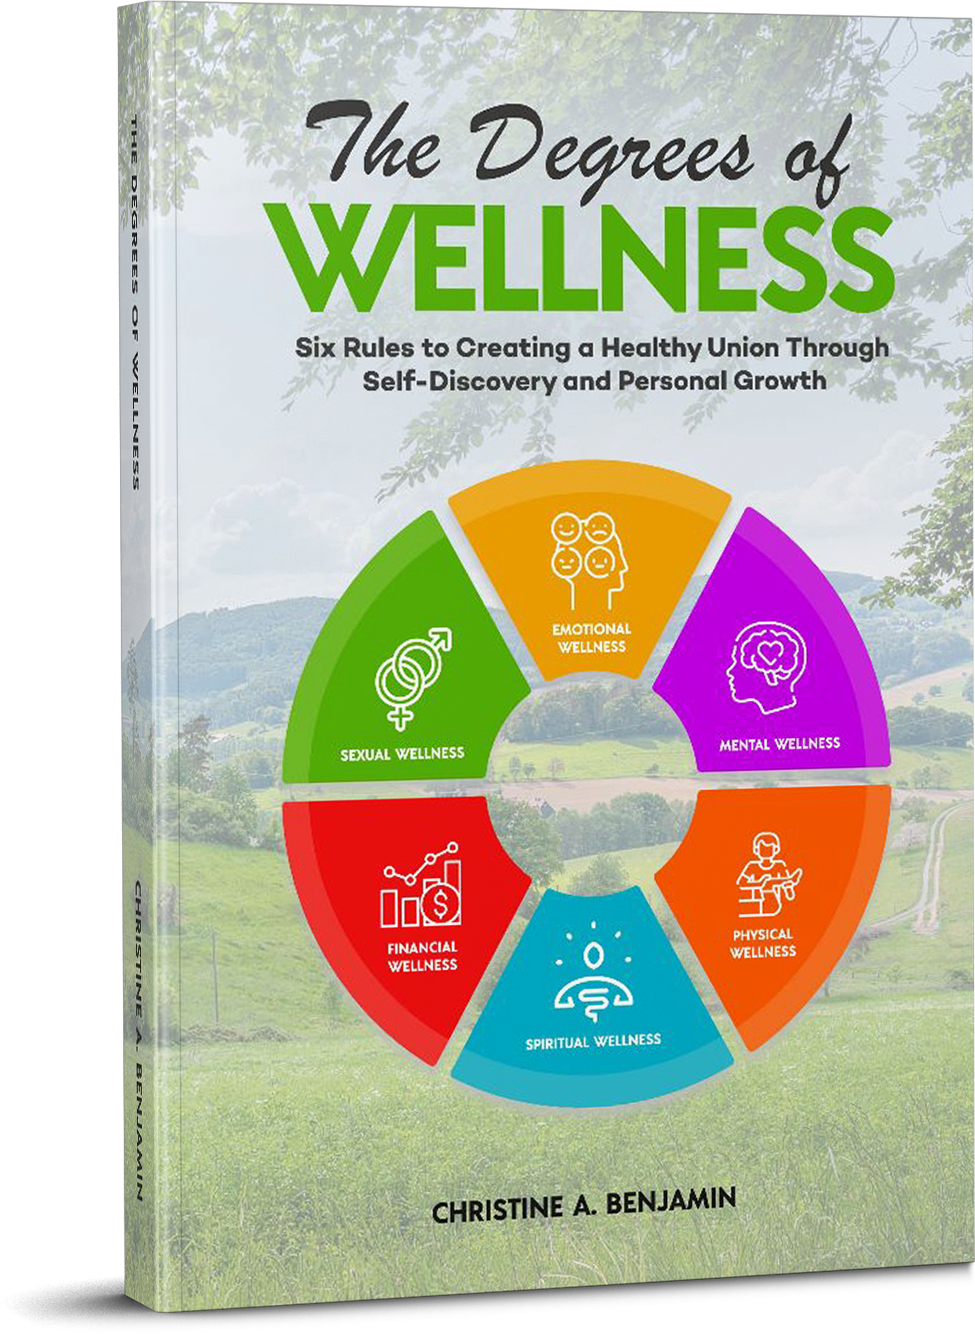 Nurturing Connections with The Degrees of Wellness Book by Christine Benjamin